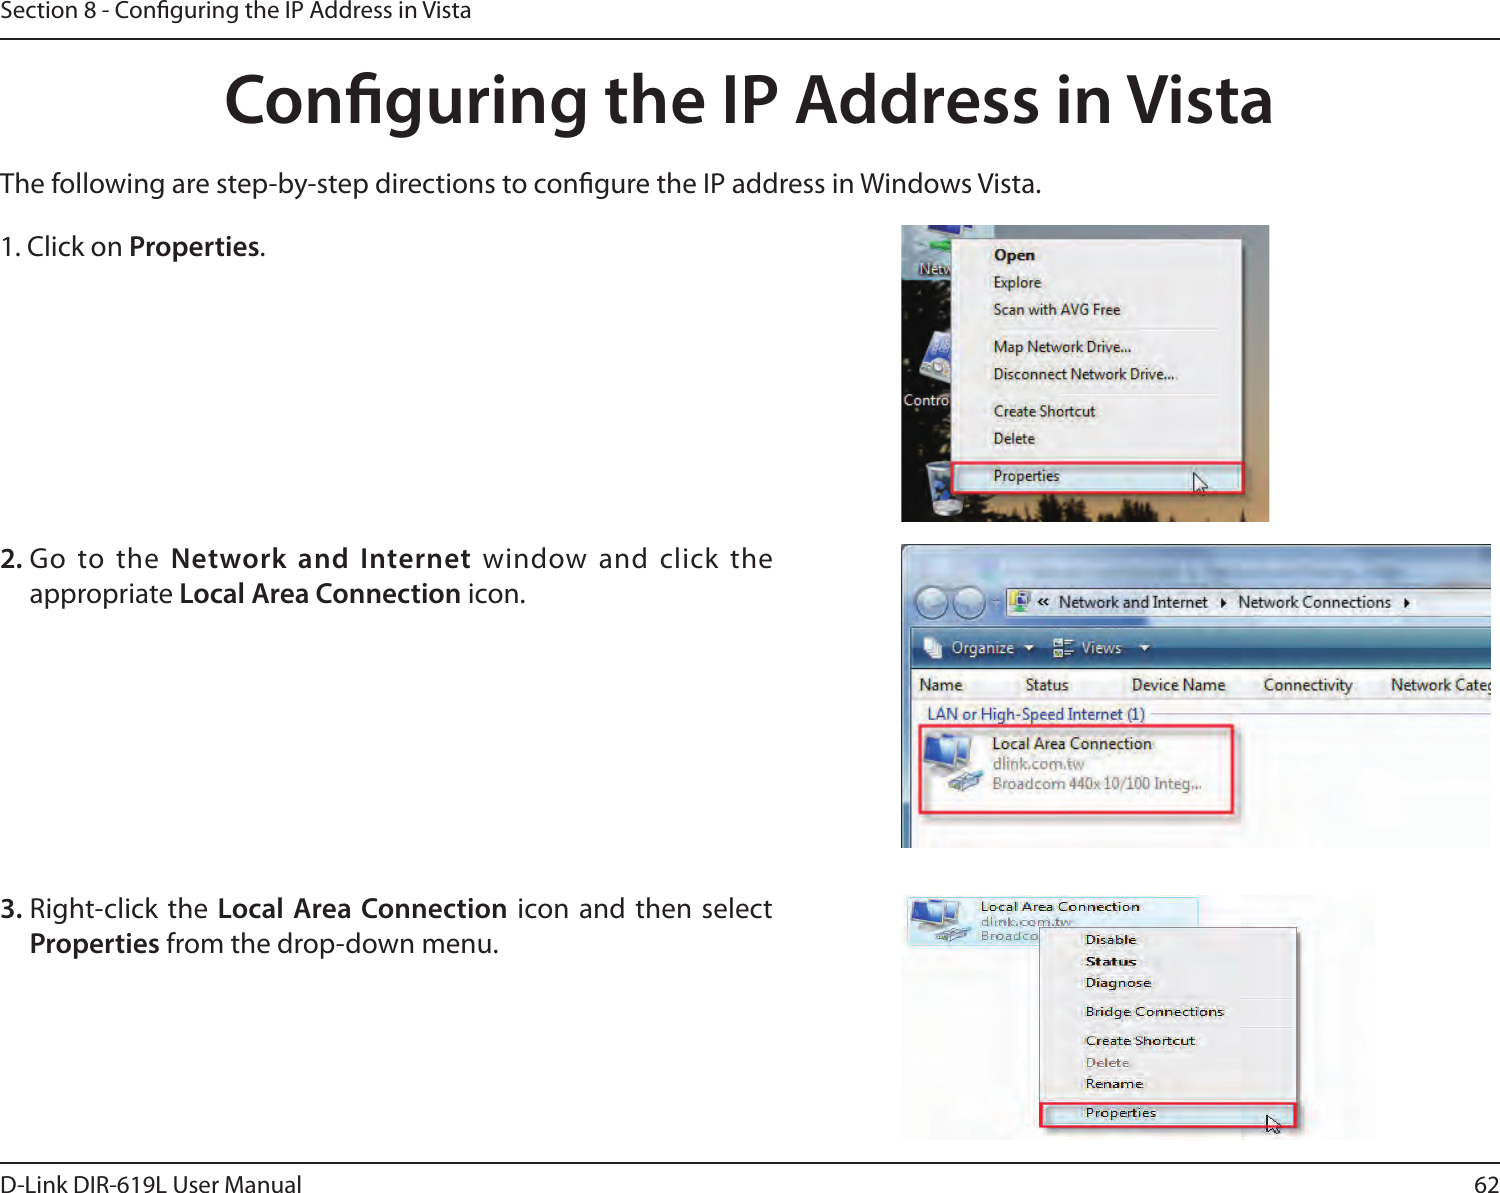 62D-Link DIR-619L User ManualSection 8 - Conguring the IP Address in VistaConguring the IP Address in VistaThe following are step-by-step directions to congure the IP address in Windows Vista.    2. Go  to  the  Network and Internet window and click the appropriate Local Area Connection icon. 1. Click on Properties.     3. Right-click the  Local Area Connection icon and then select Properties from the drop-down menu. 